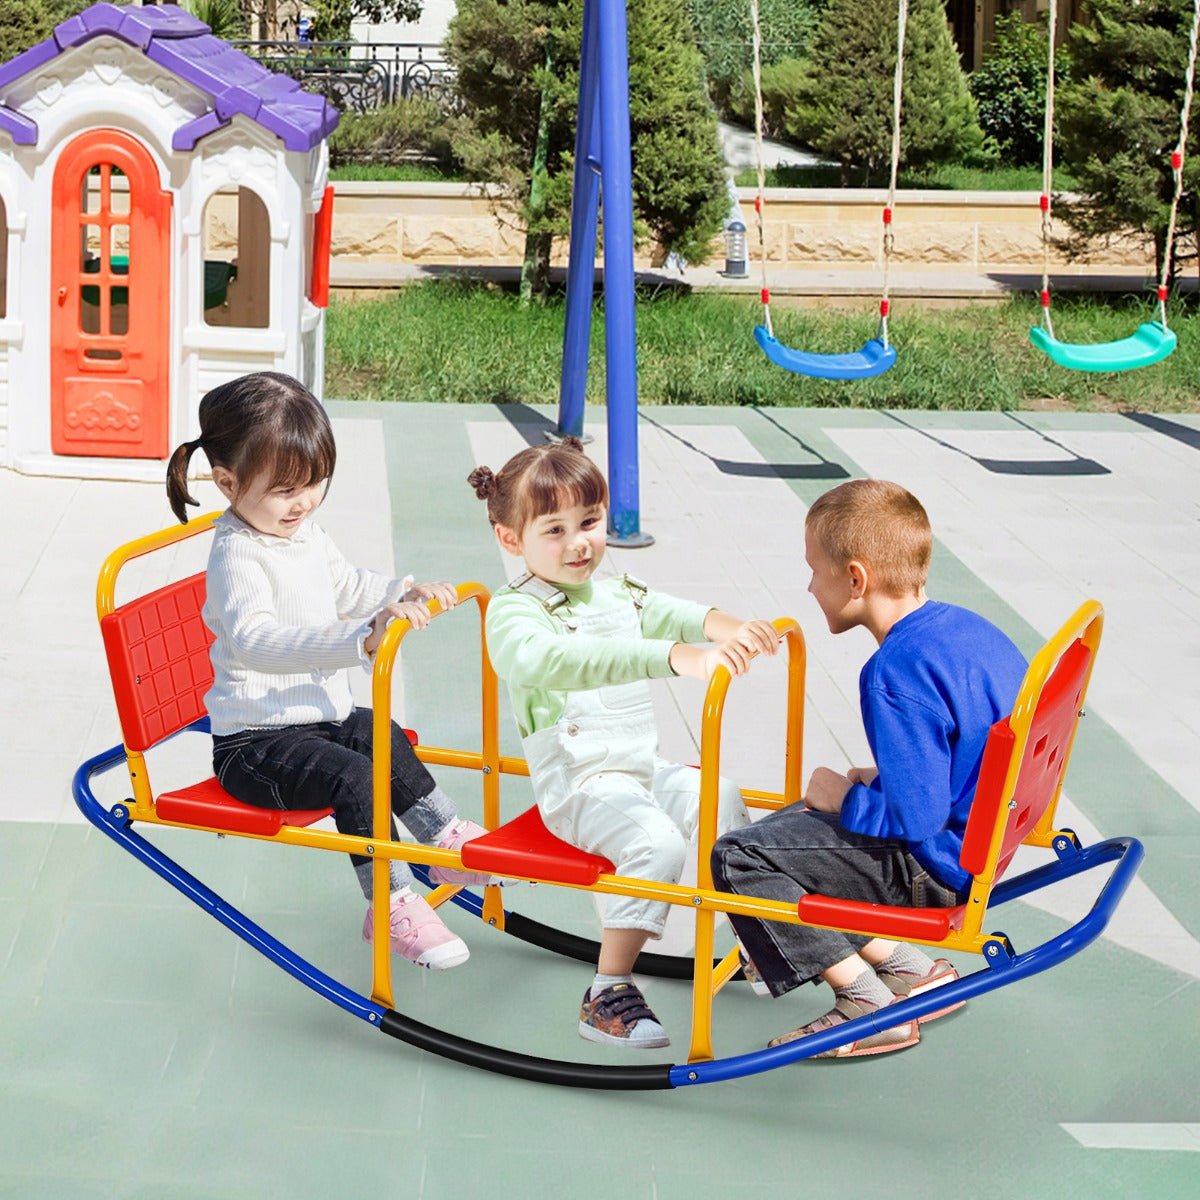 Metal Seesaw for Children: Rocking Fun with Sturdy Handlebars